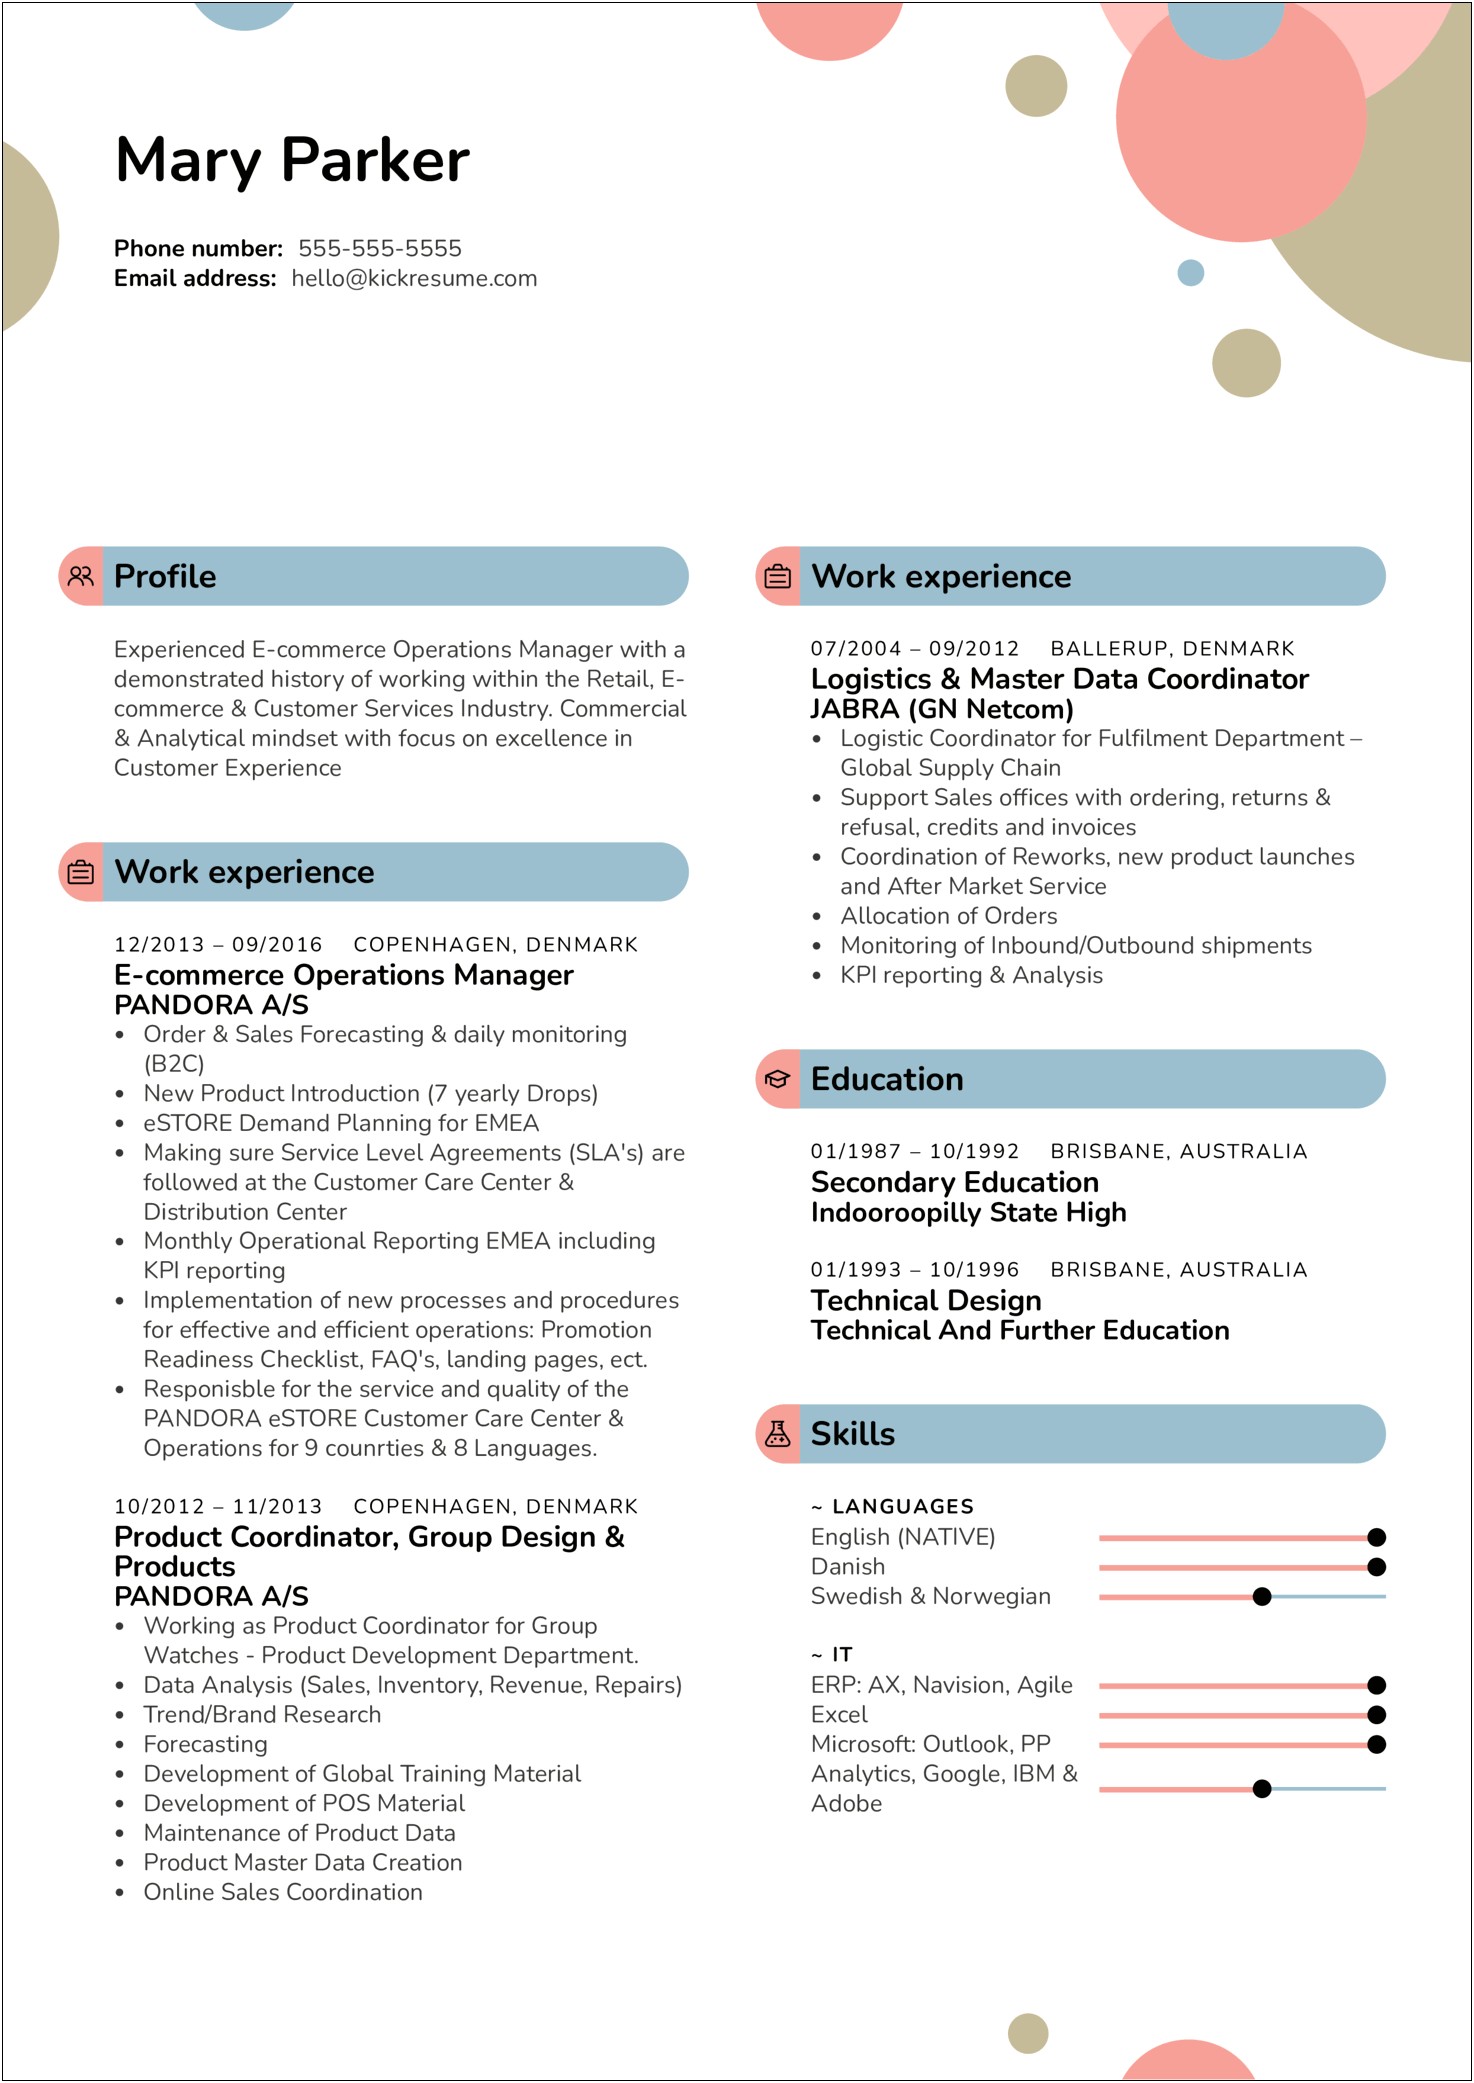 Example Resume Retail Store Daily Checklist